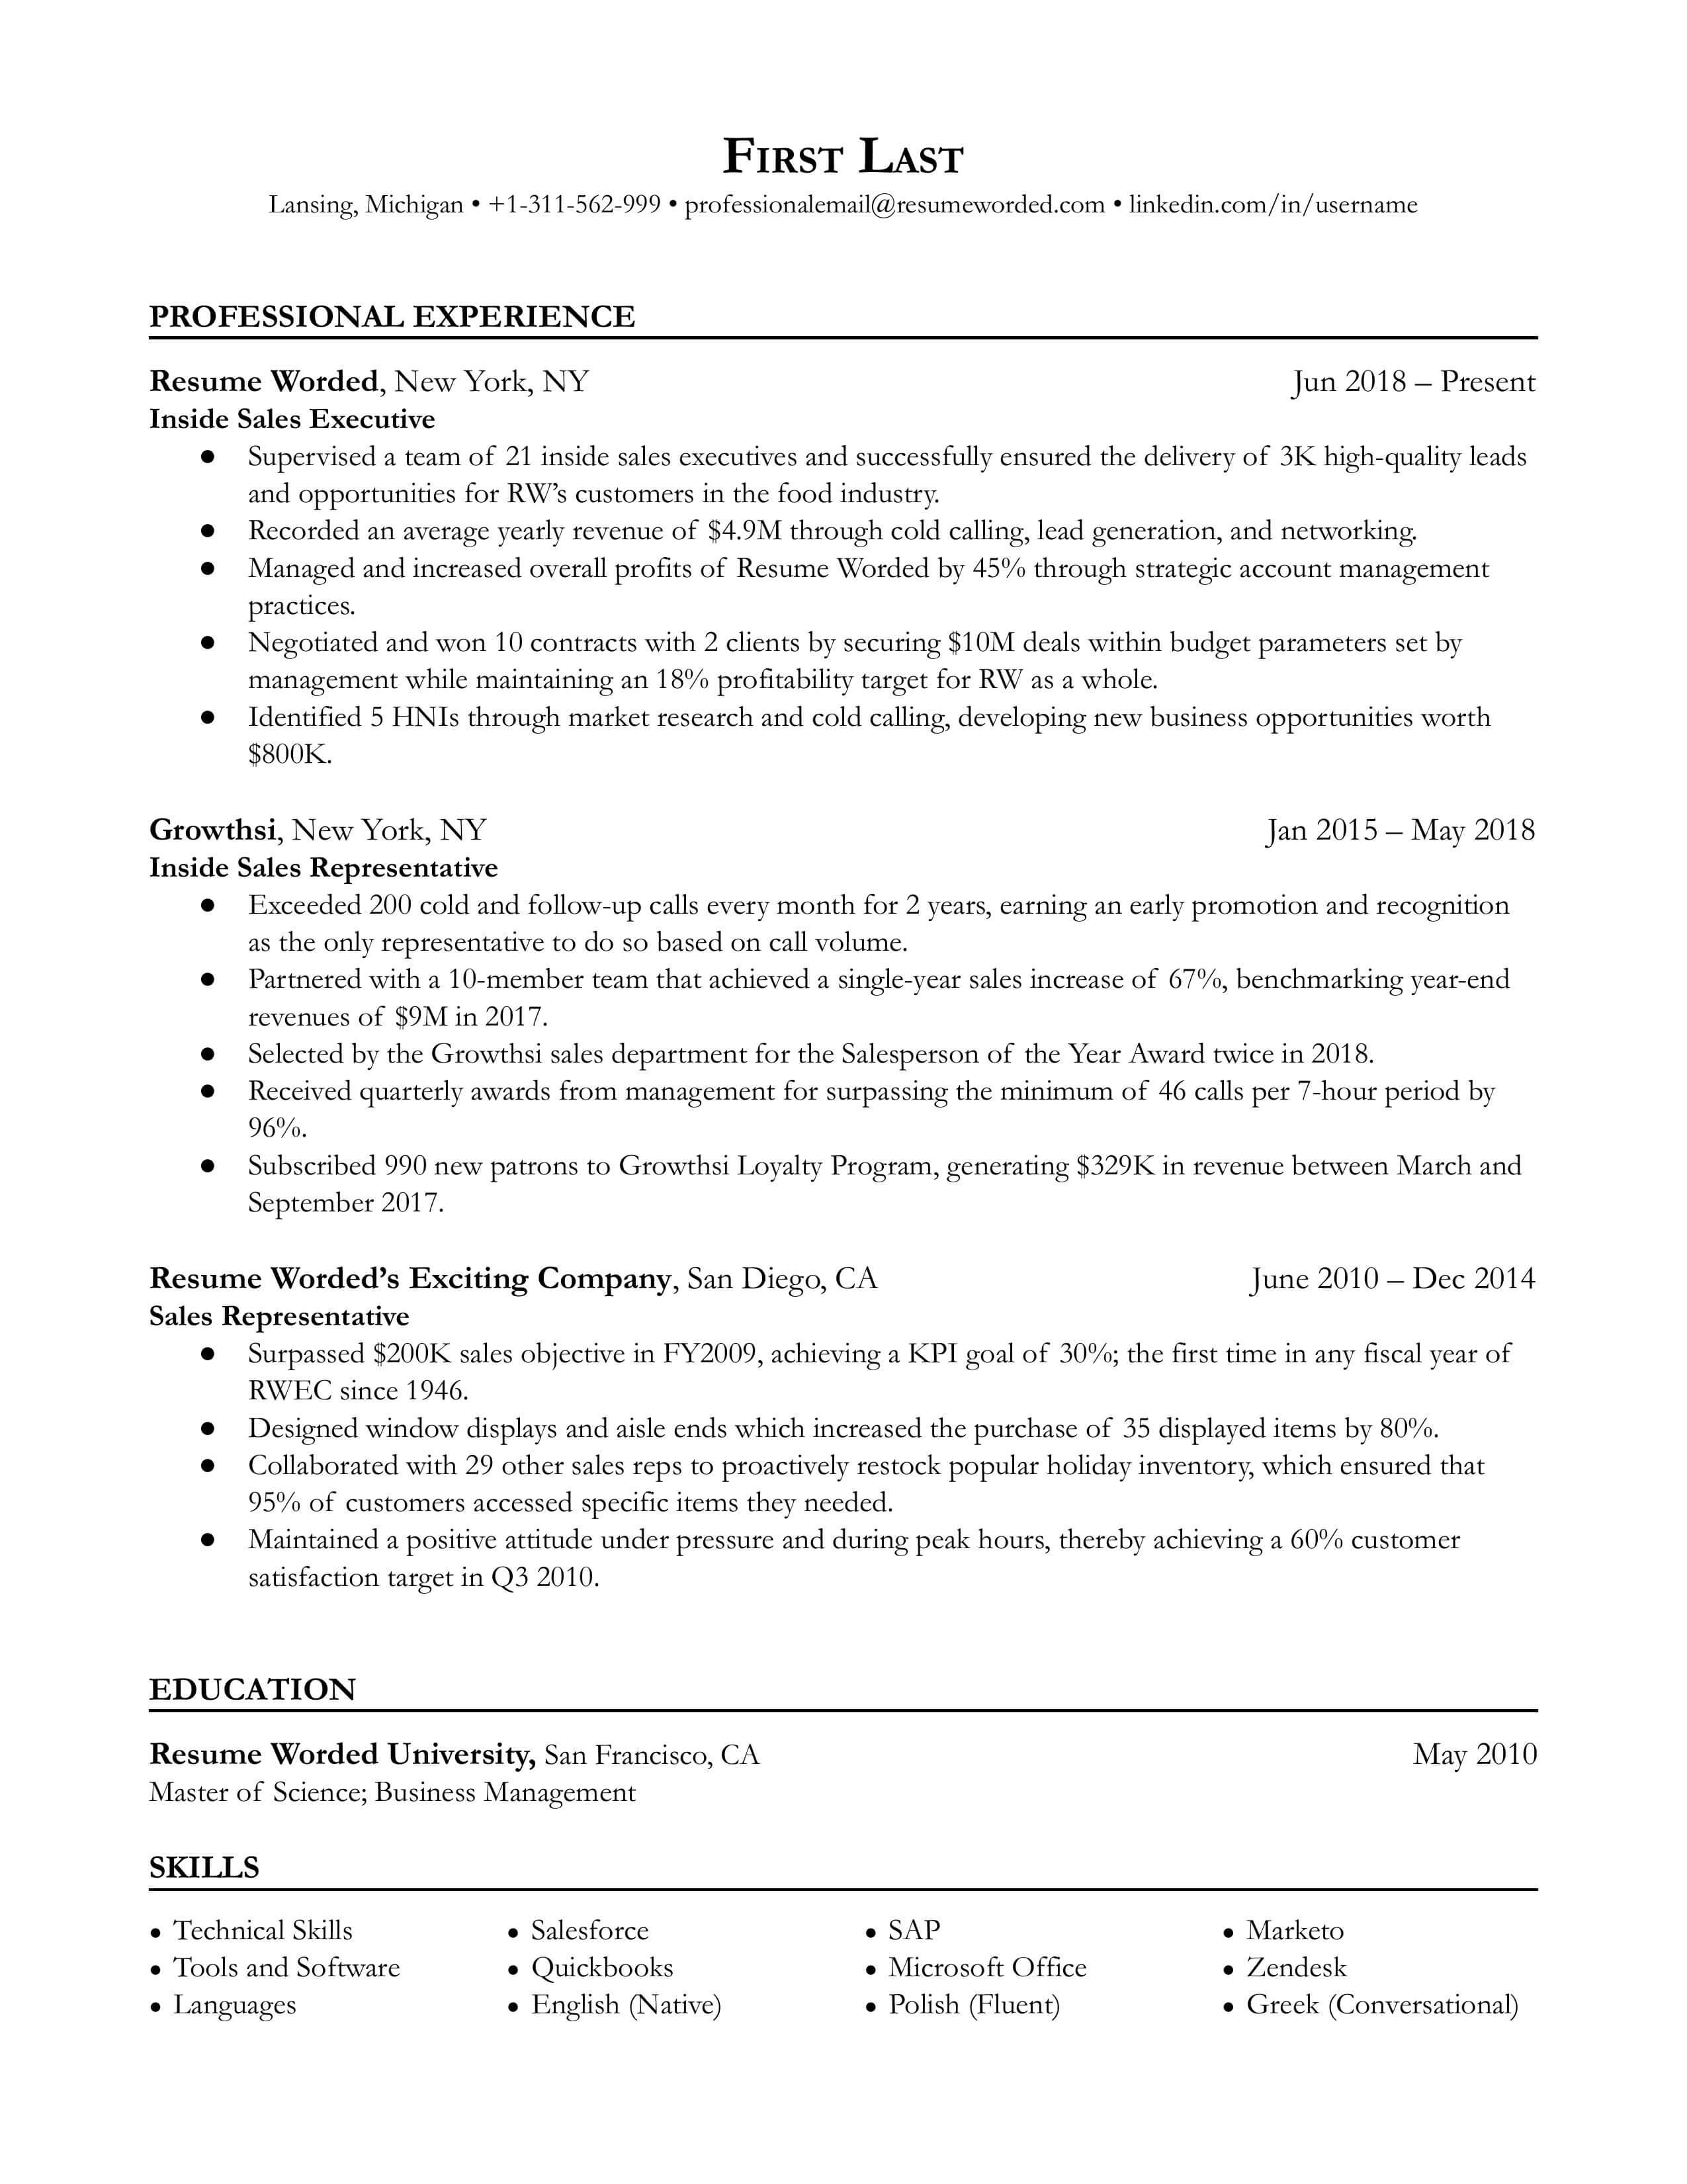 Inside Sales Executive Resume Template + Example